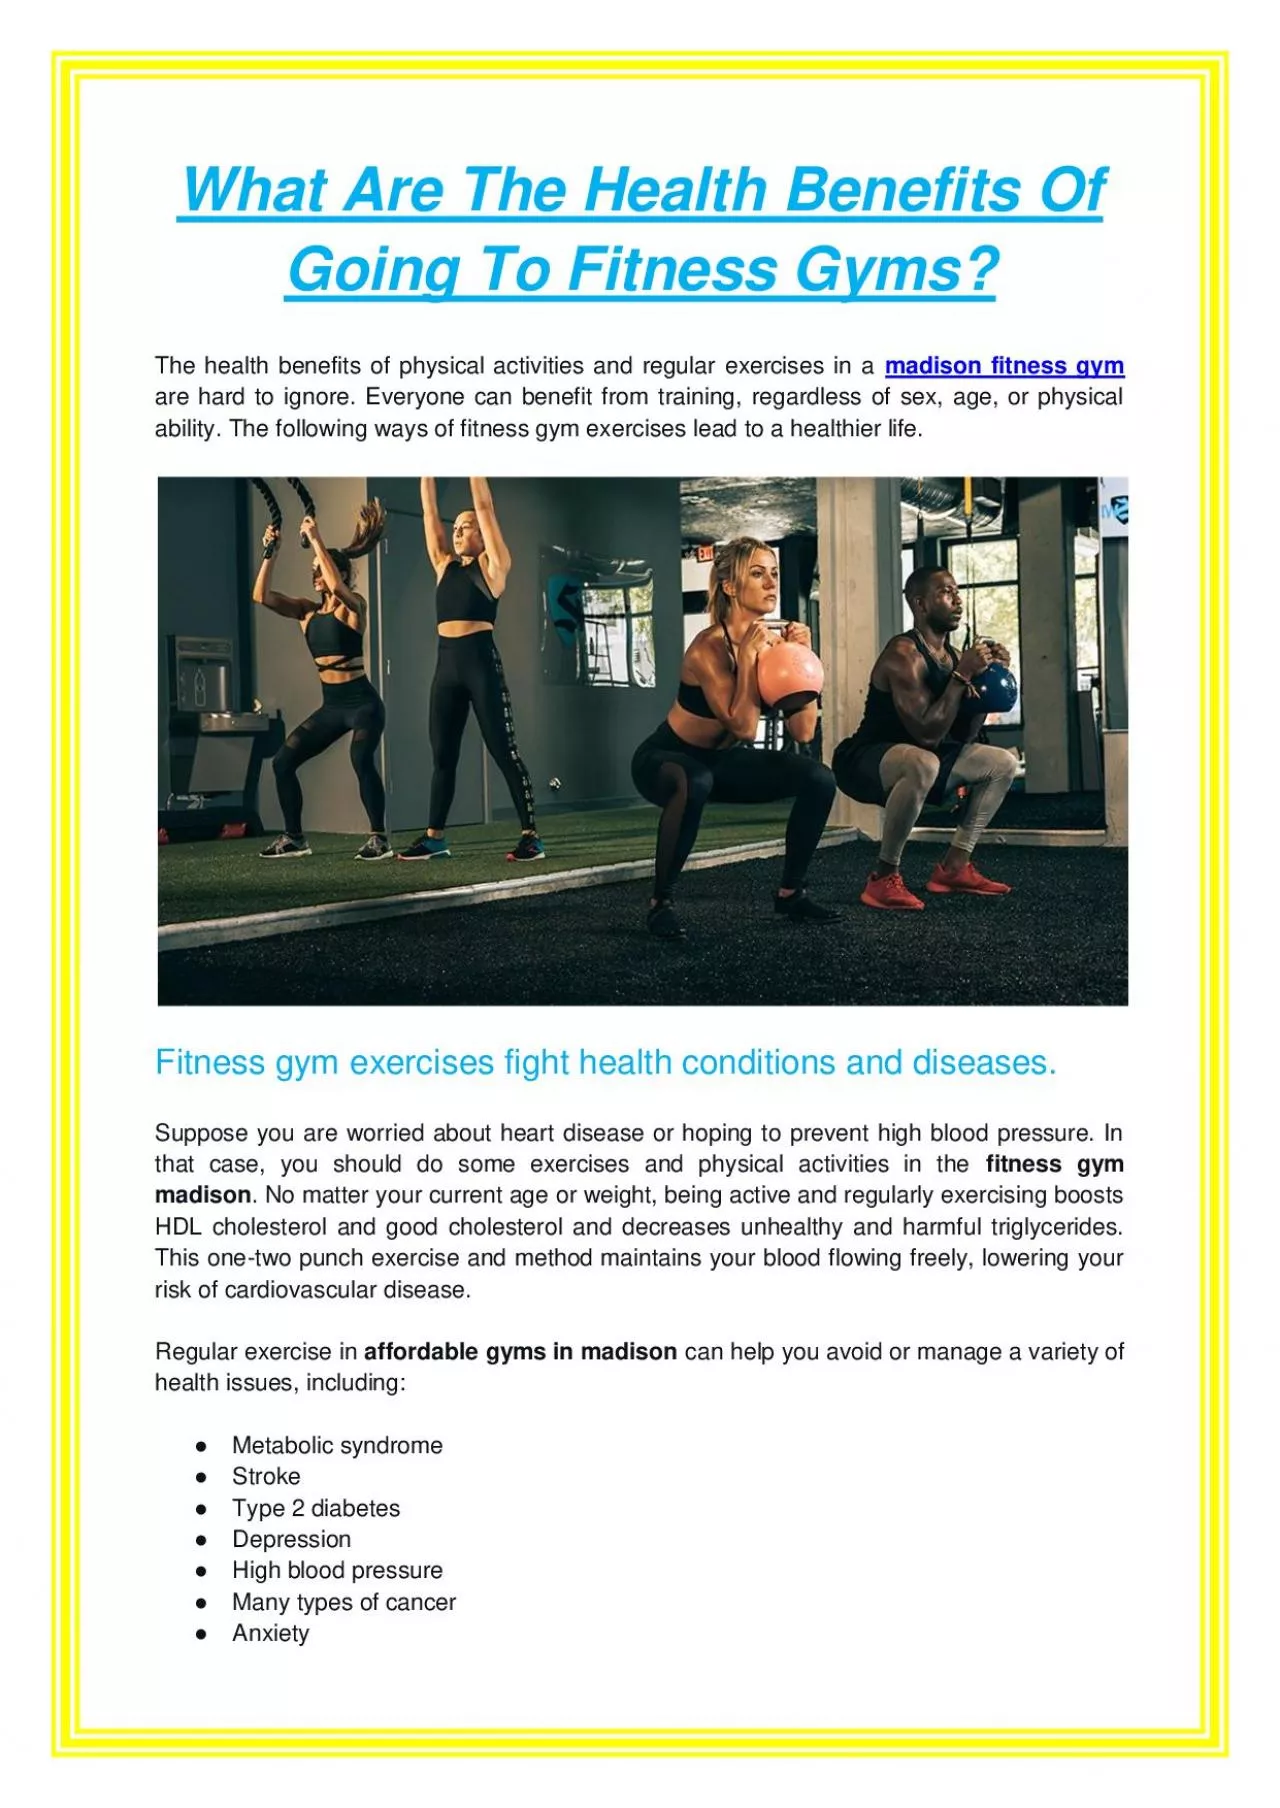 What Are The Health Benefits Of Going To Fitness Gyms?